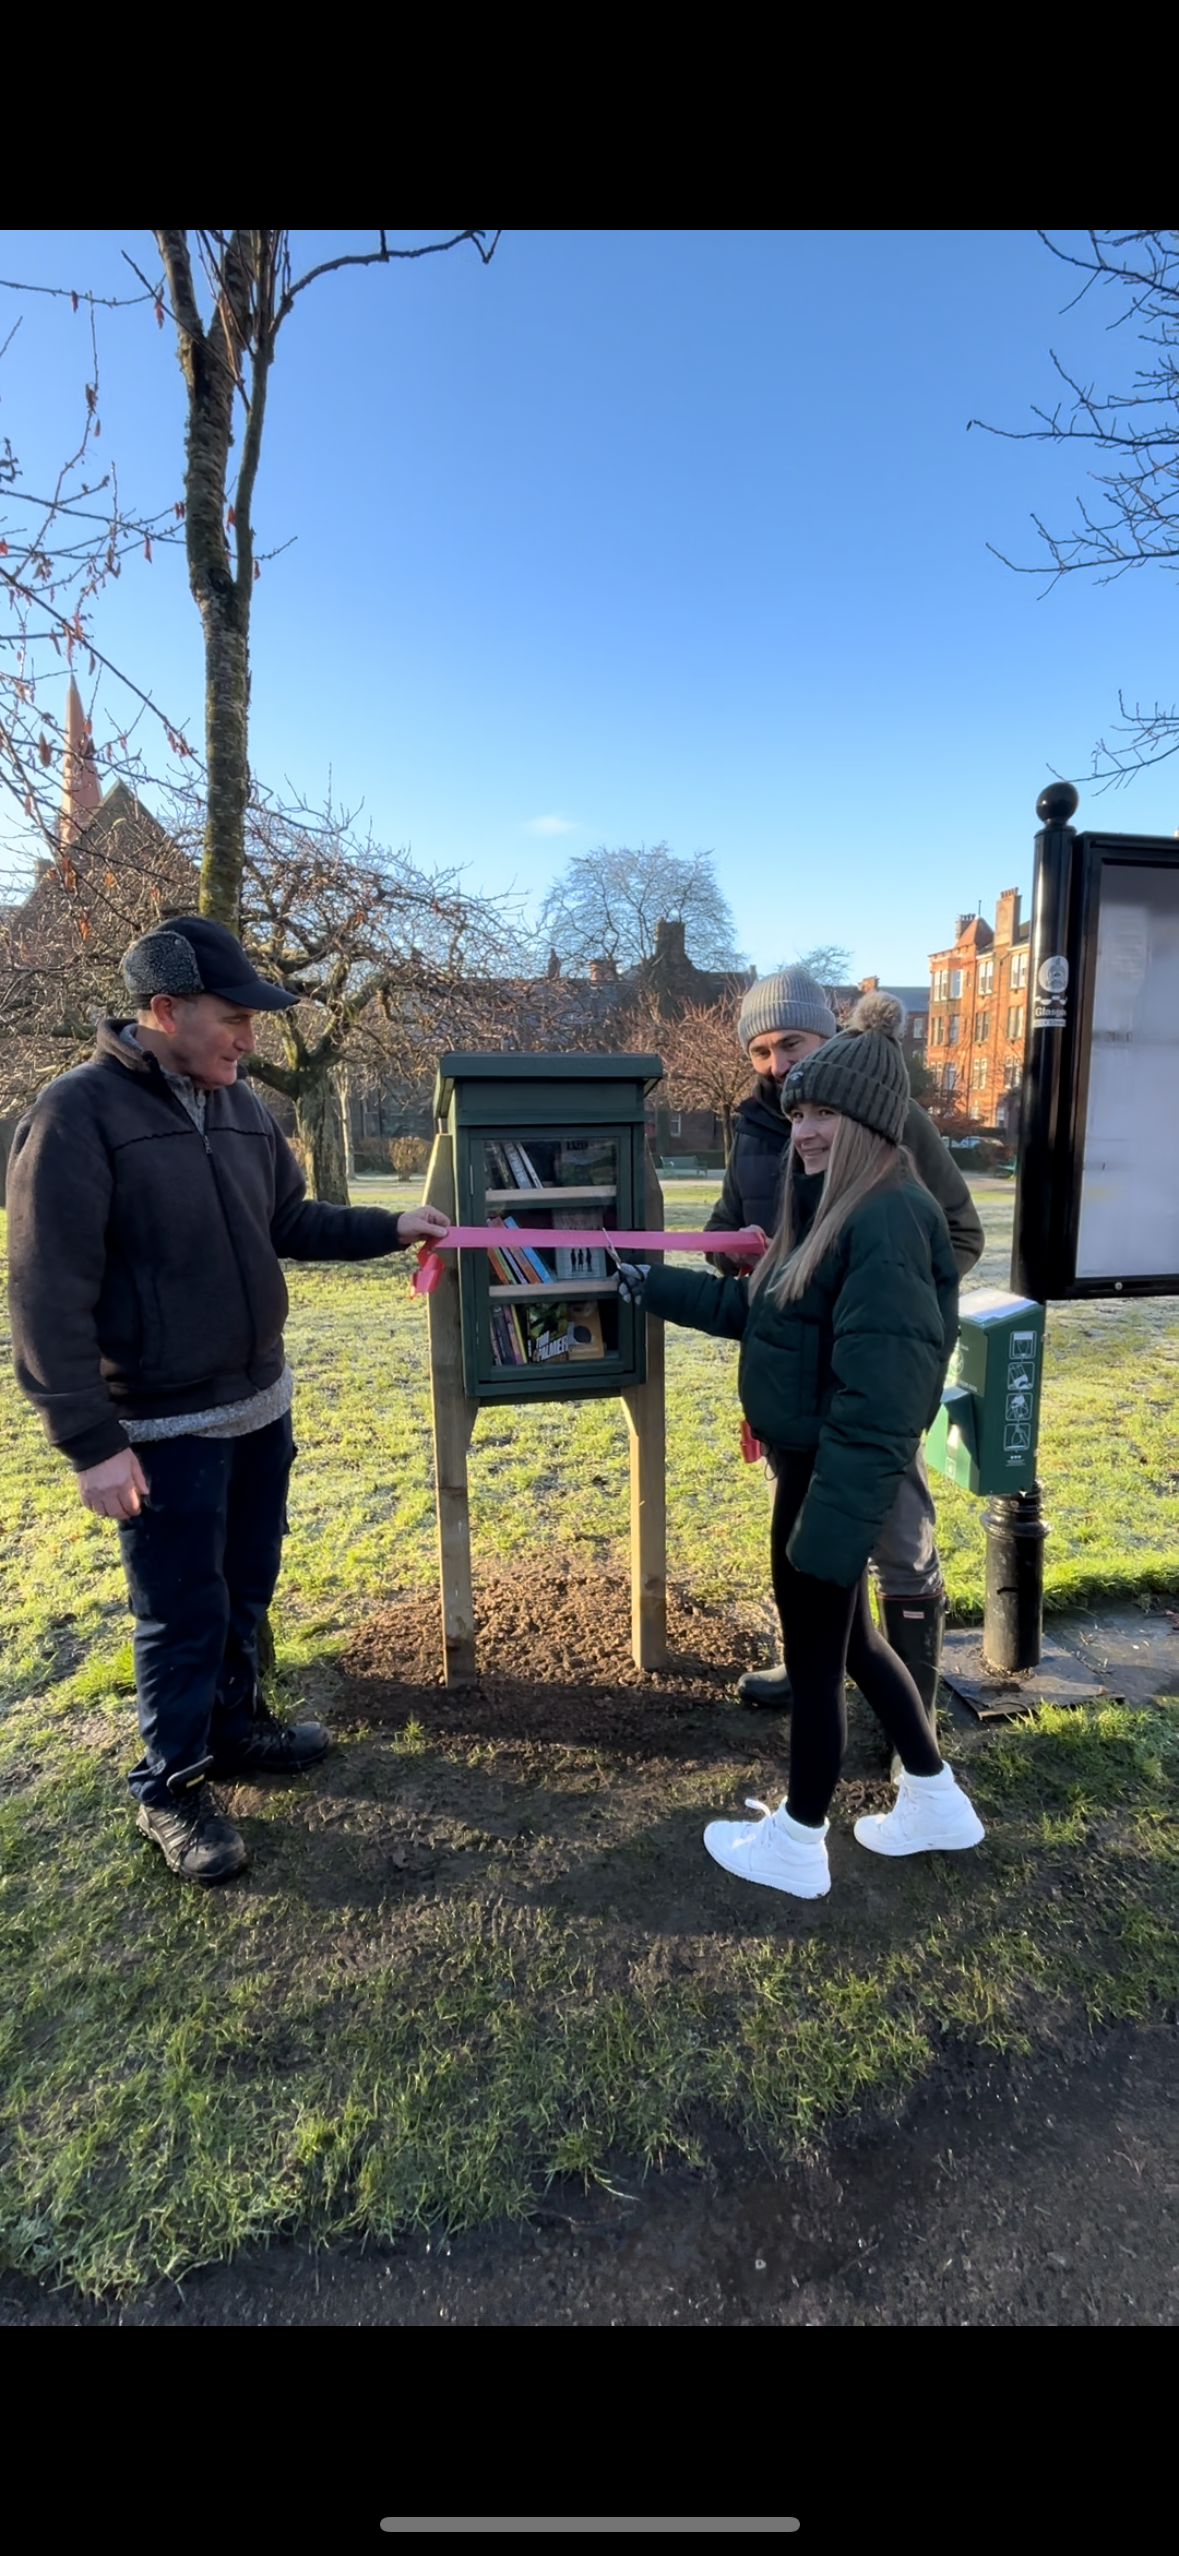 Grand Unveiling of the Book lending library by Lexie from the Friends of Naseby Park